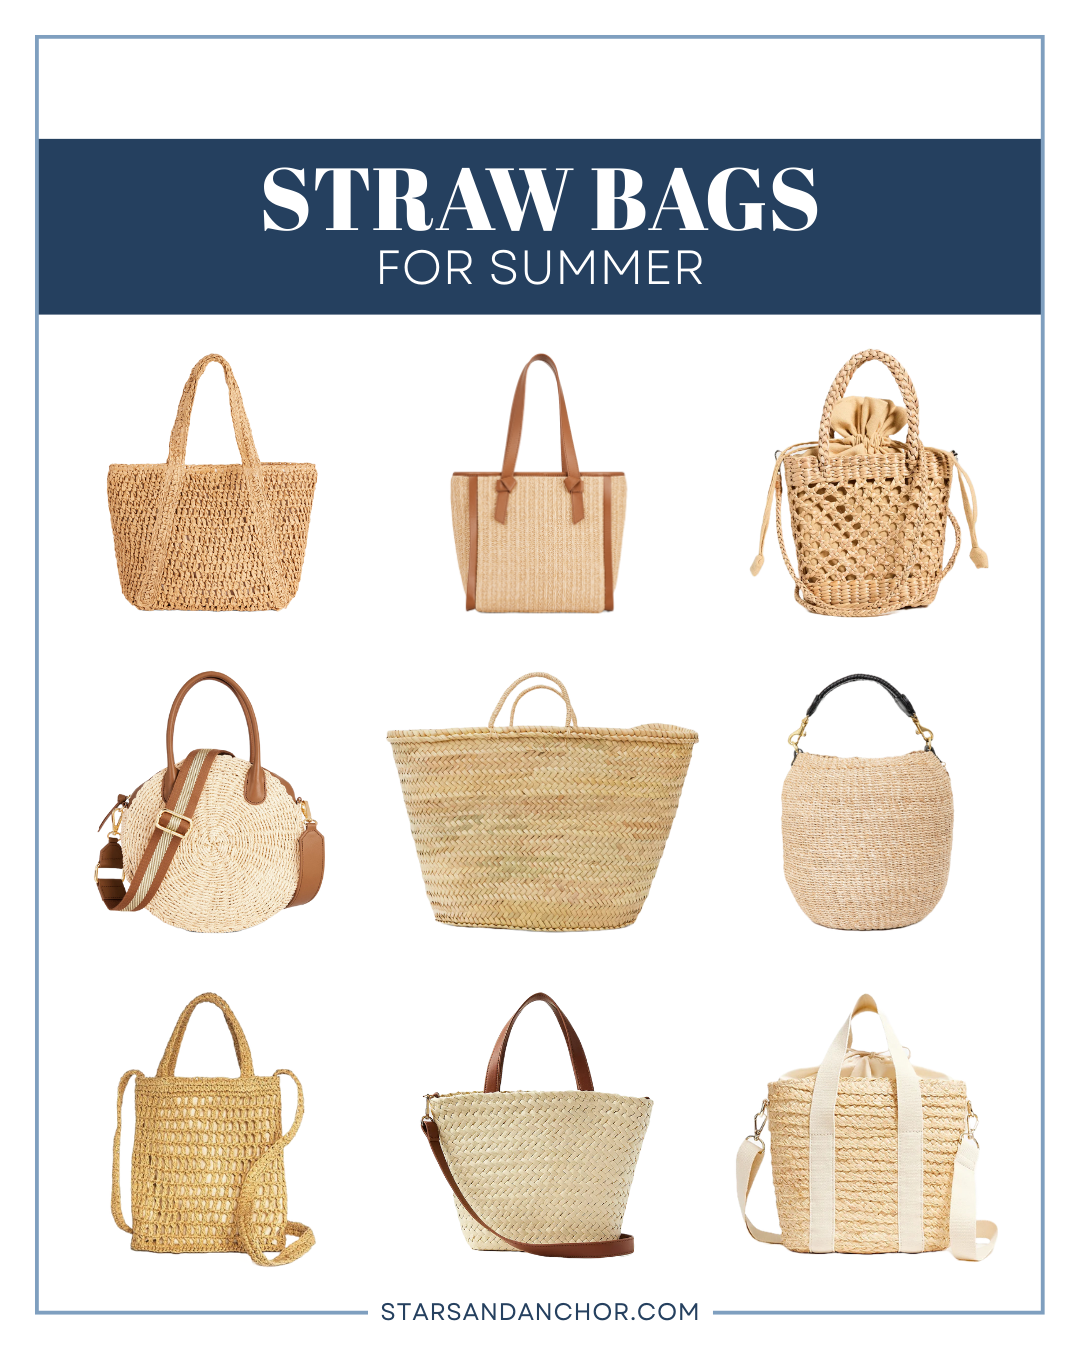 12 Chic Straw Bags for Summer - Stars & Anchor